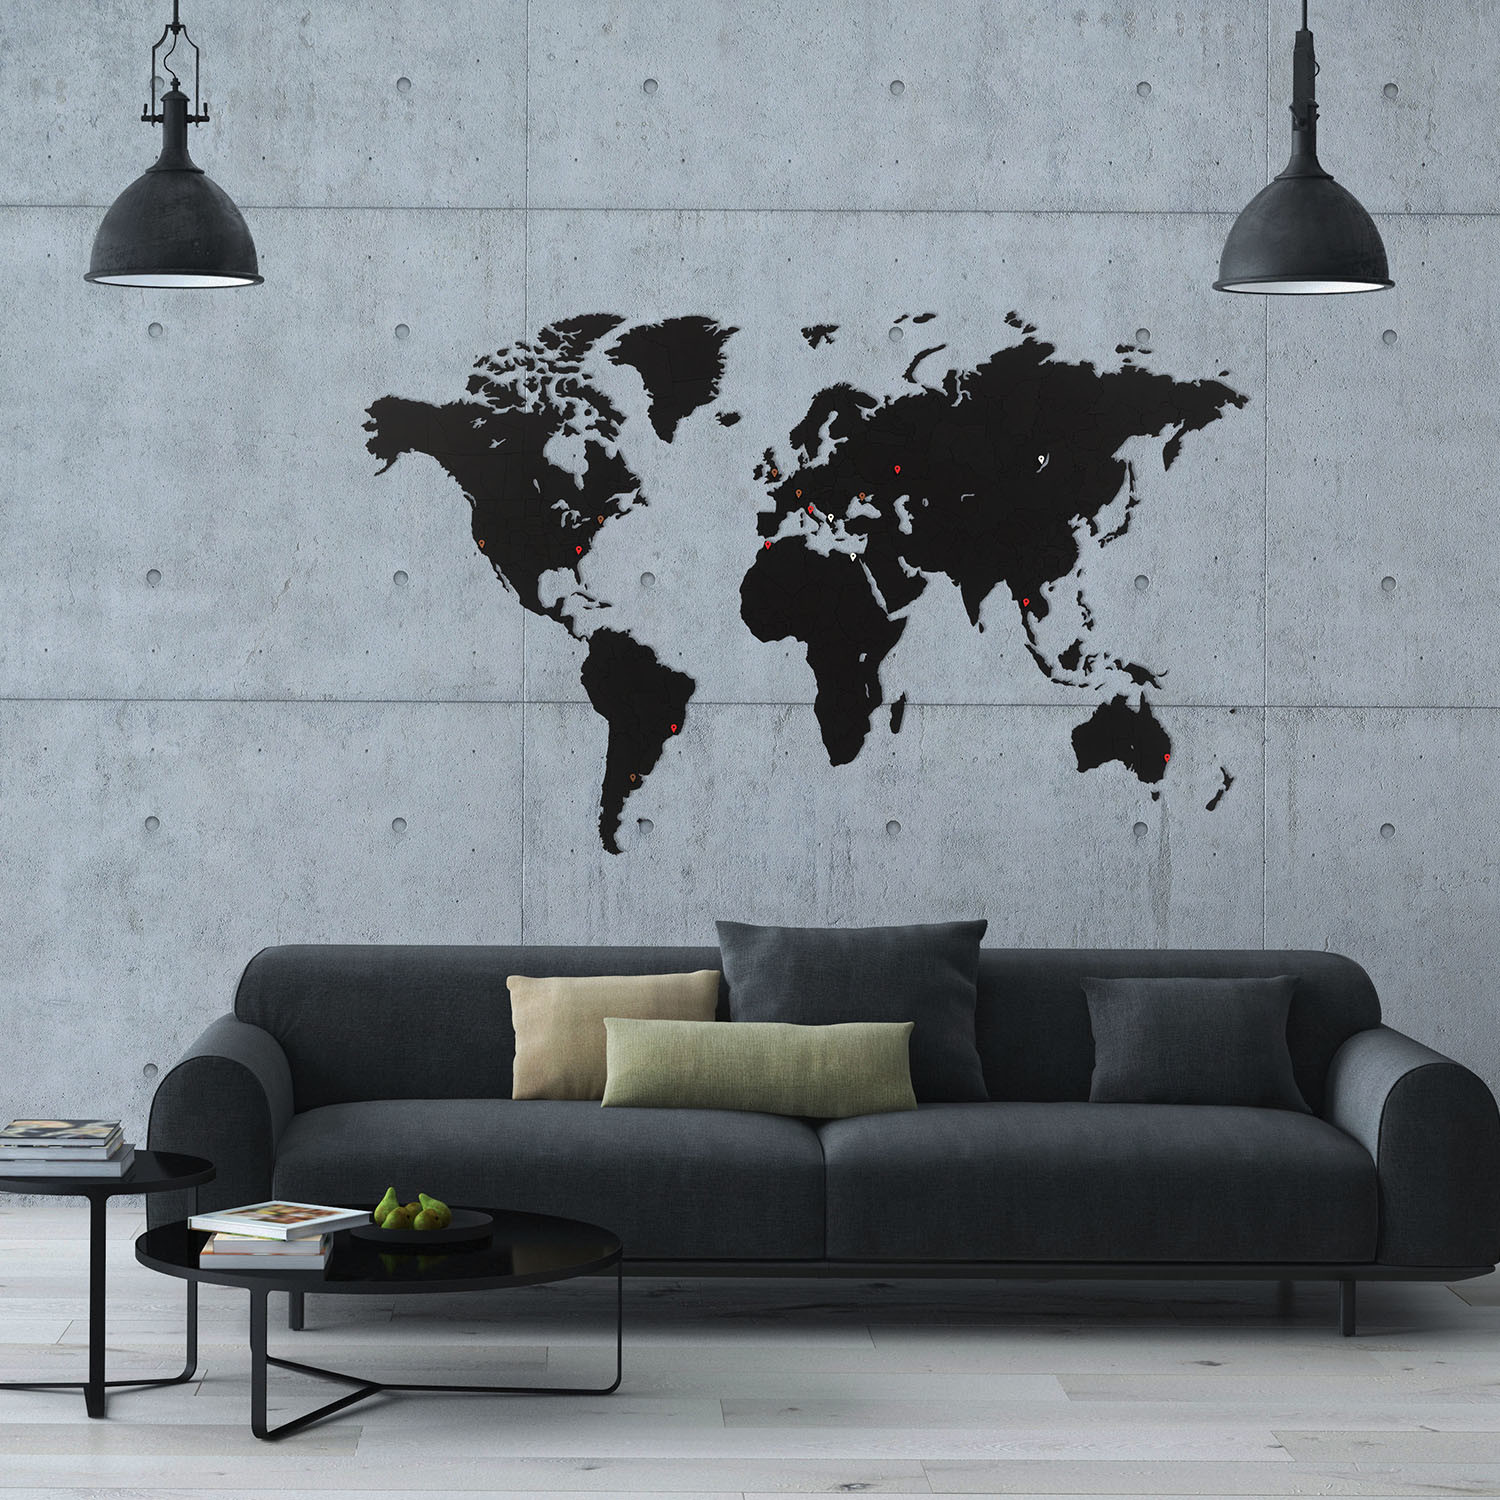 & Luxurious Wooden World Map Wall Decoration for Living Room MiMi Innovations